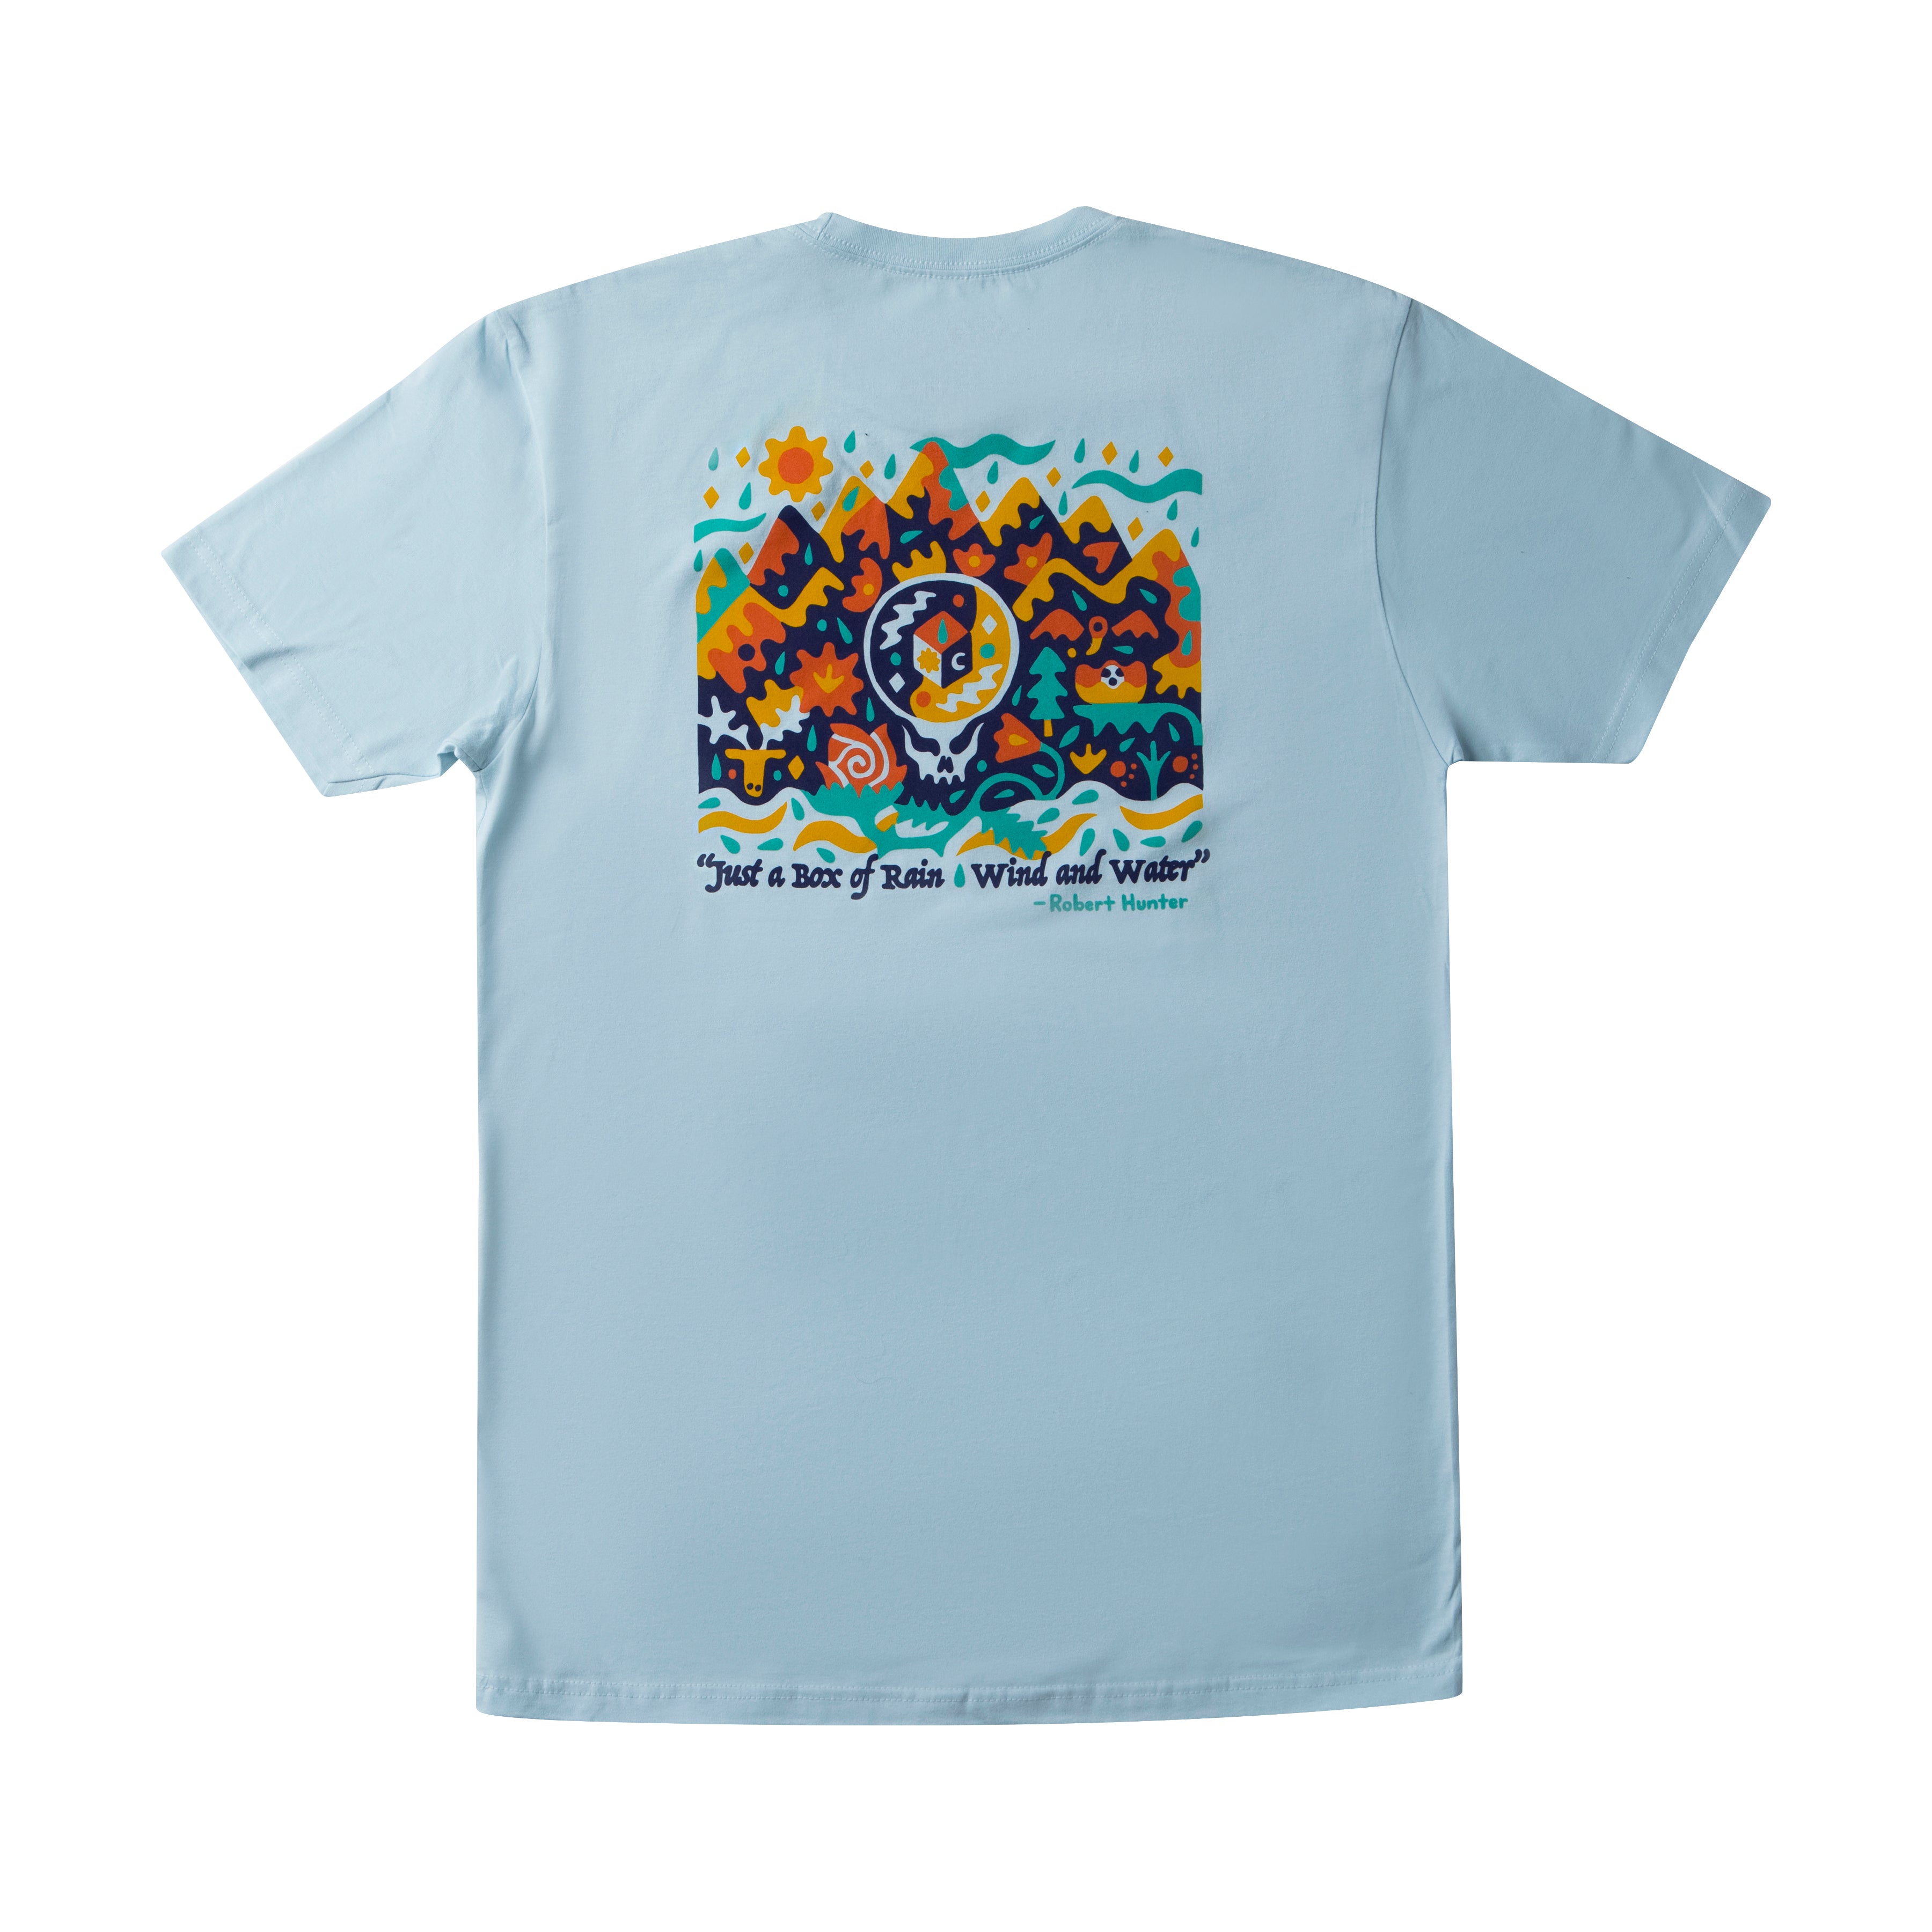 Grateful Dead x TGR “Just a Box of Rain, Wind and Water” Tee by Wyatt Grant